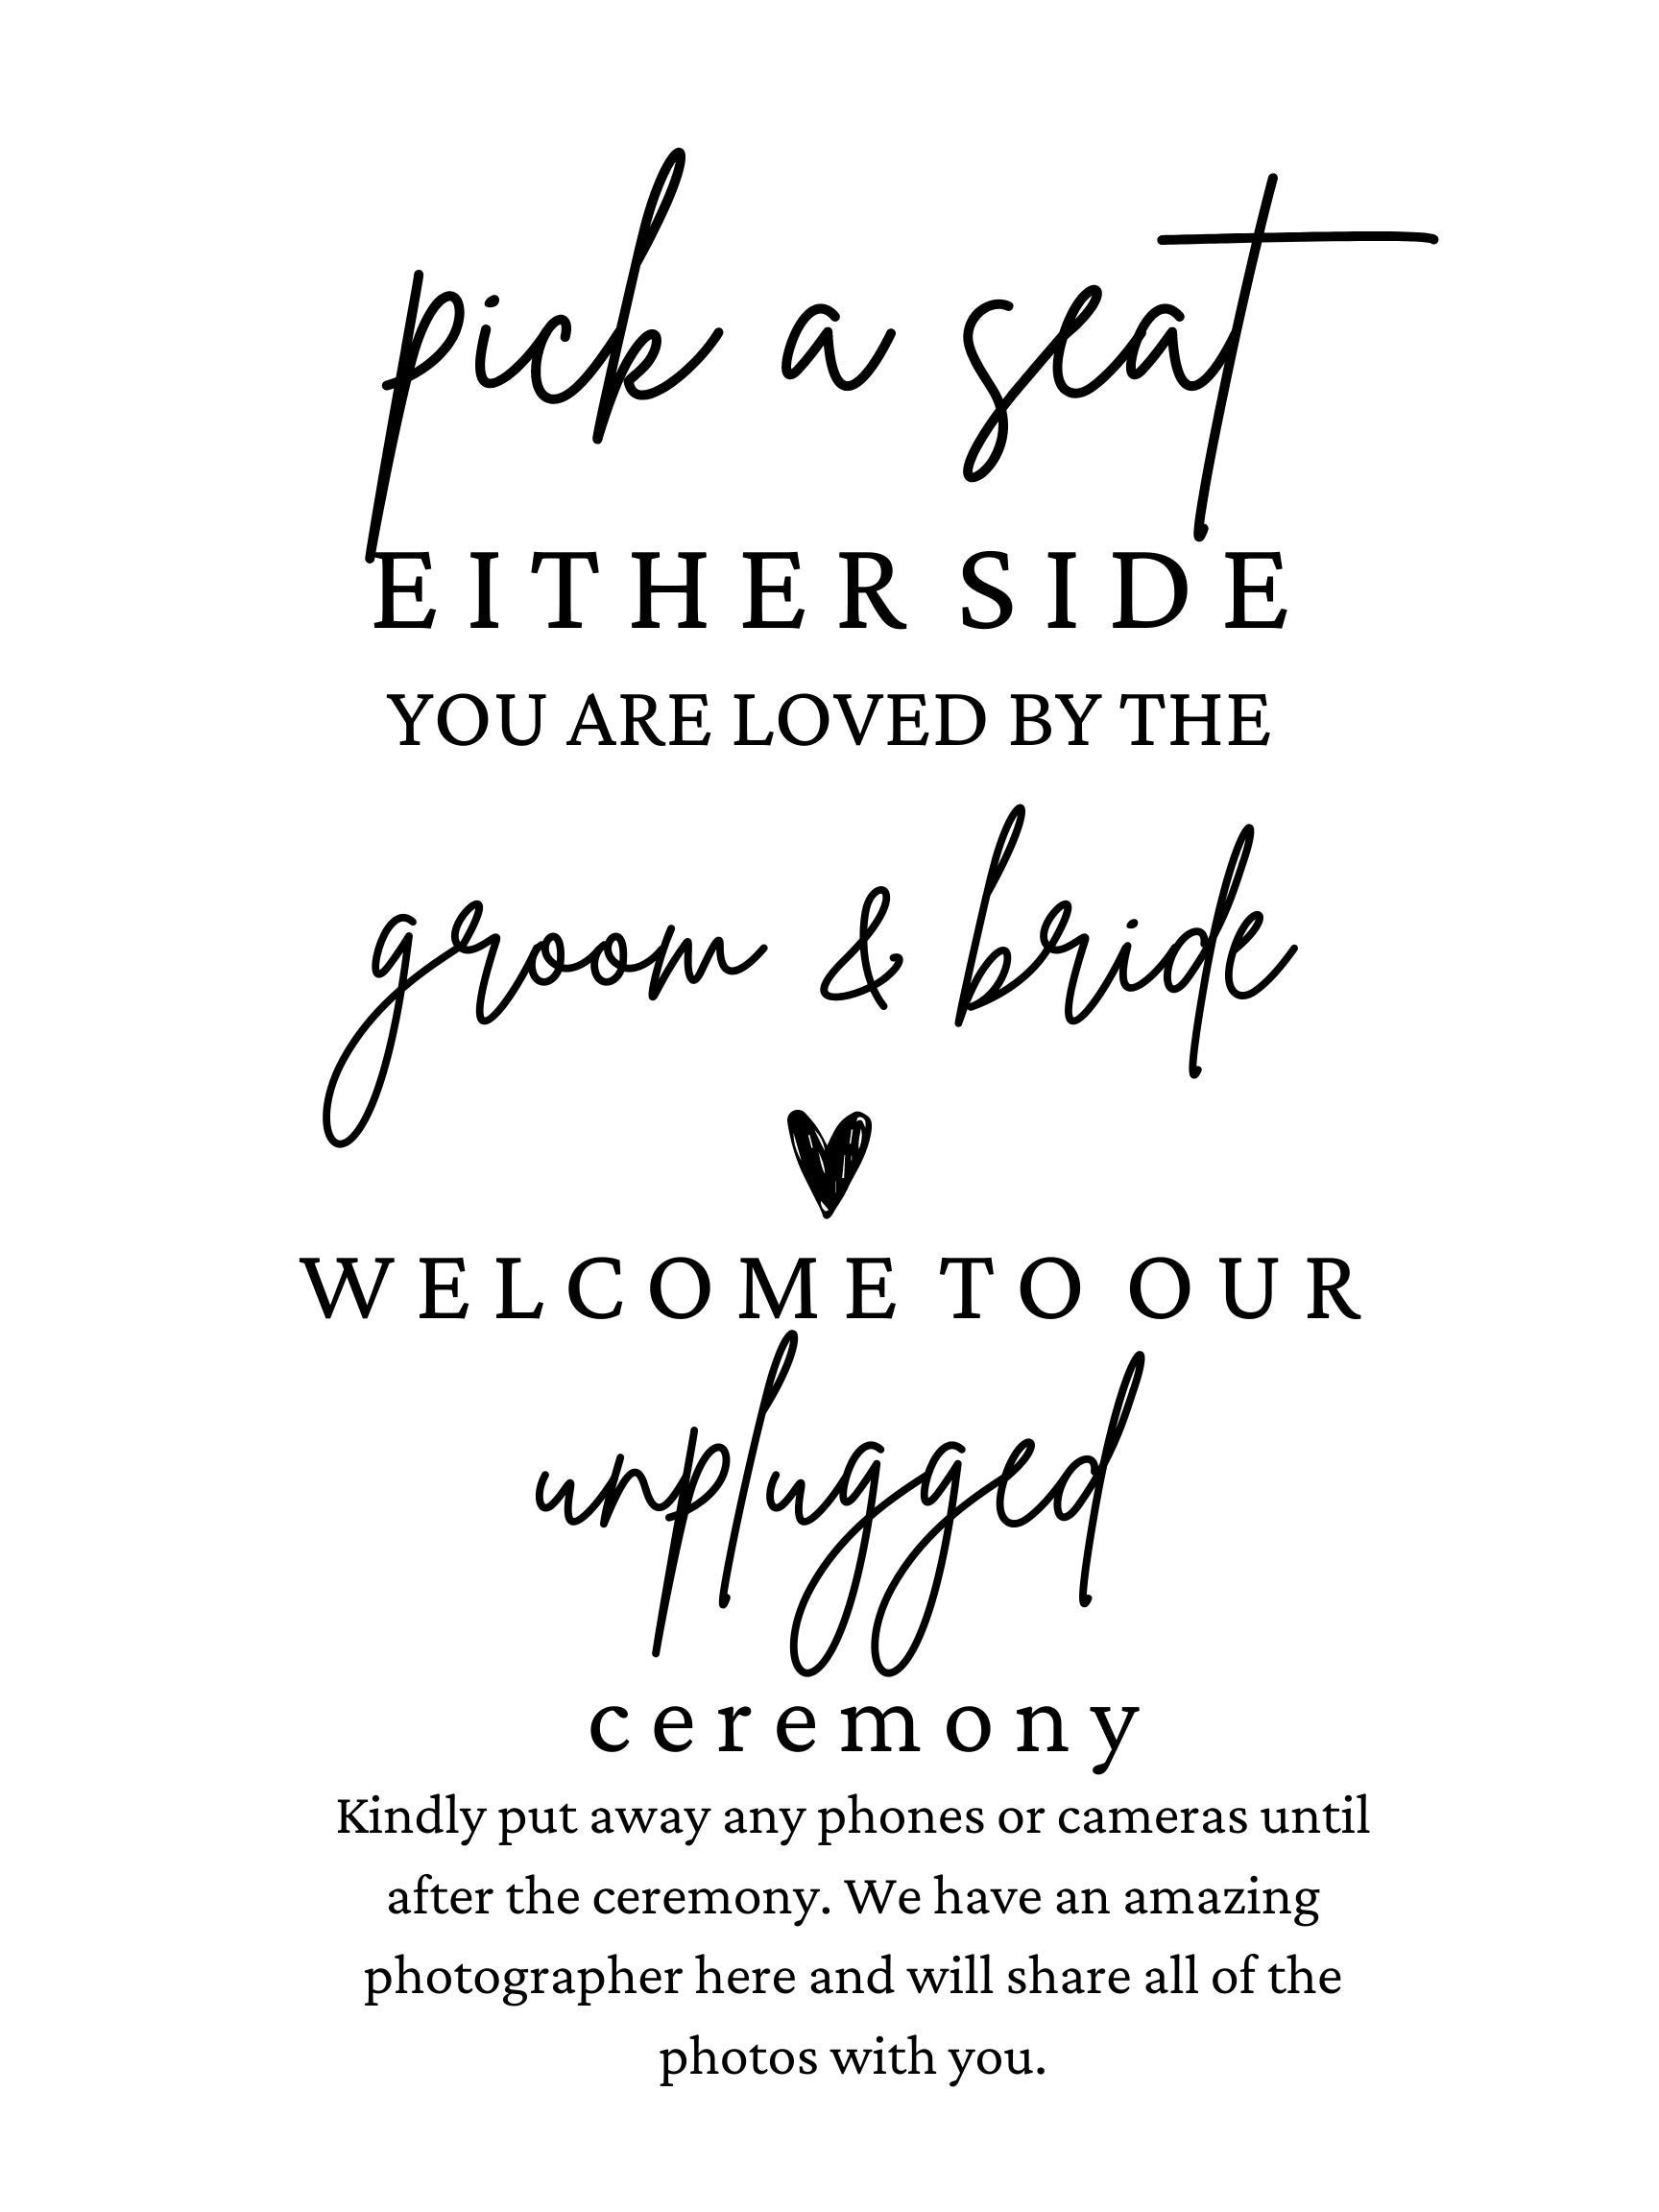 Choose A Seat Not A Side Sign, 24 Sizes, Wedding Welcome Sign